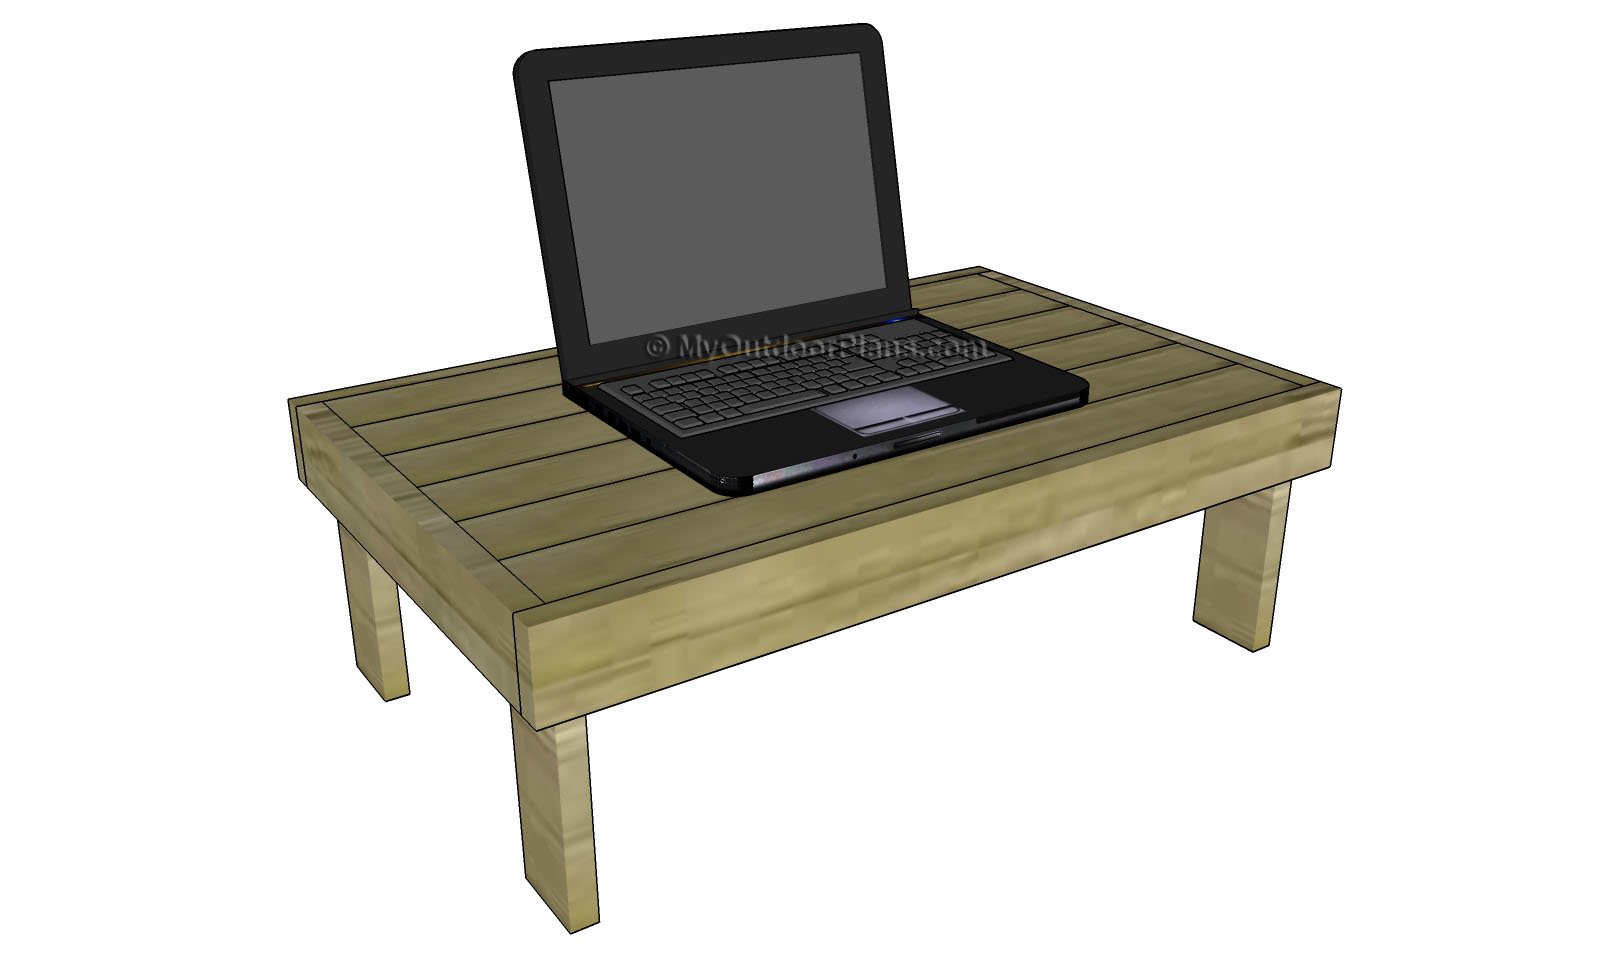 Lap Desk Plans  Free Outdoor Plans - DIY Shed, Wooden Playhouse, Bbq 